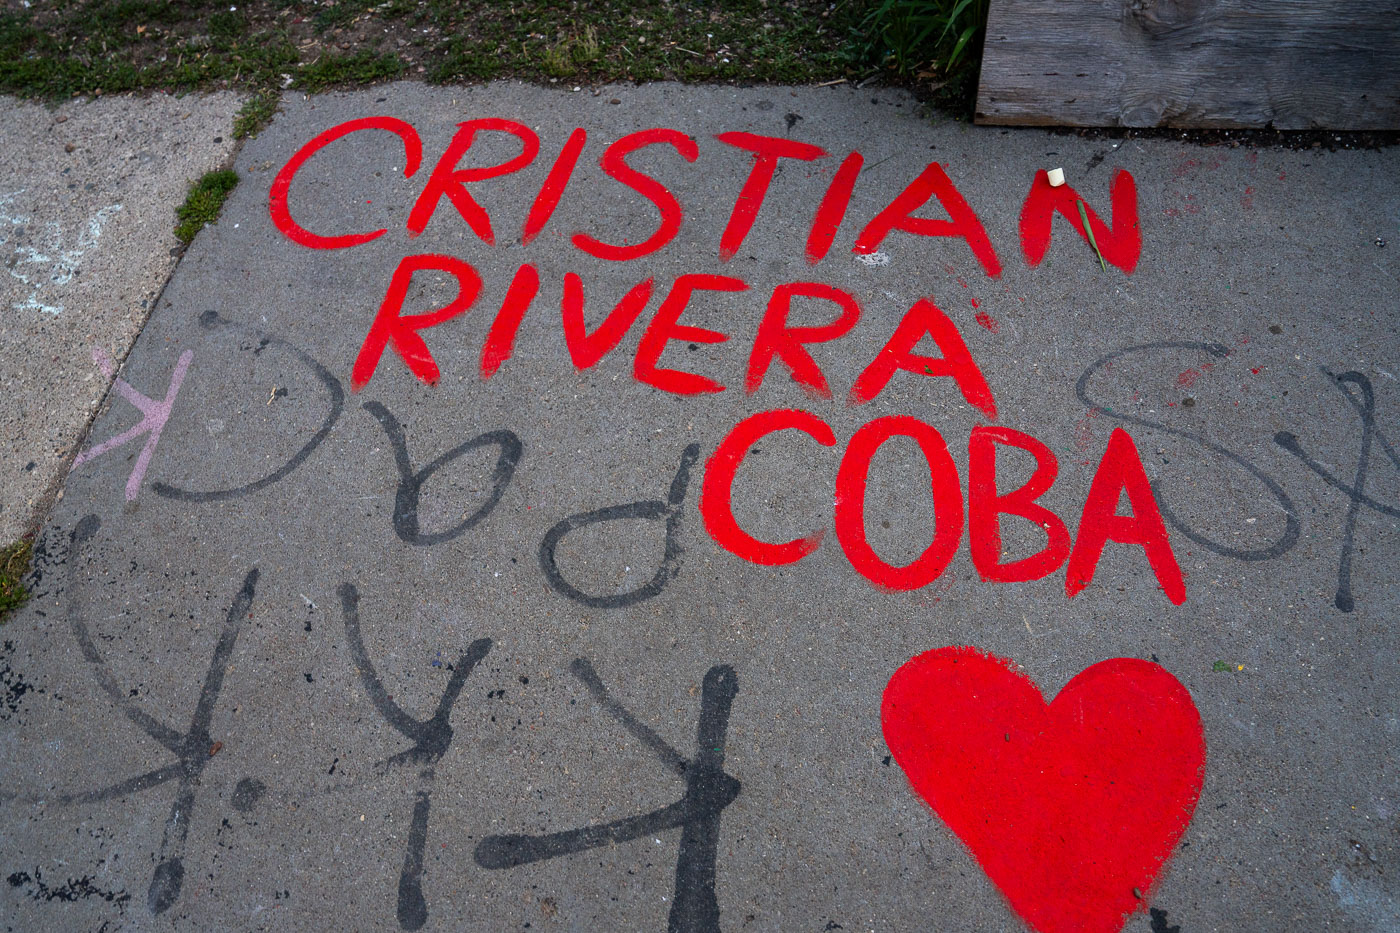 Cristian Rivera Coba and heart painted on sidewalk